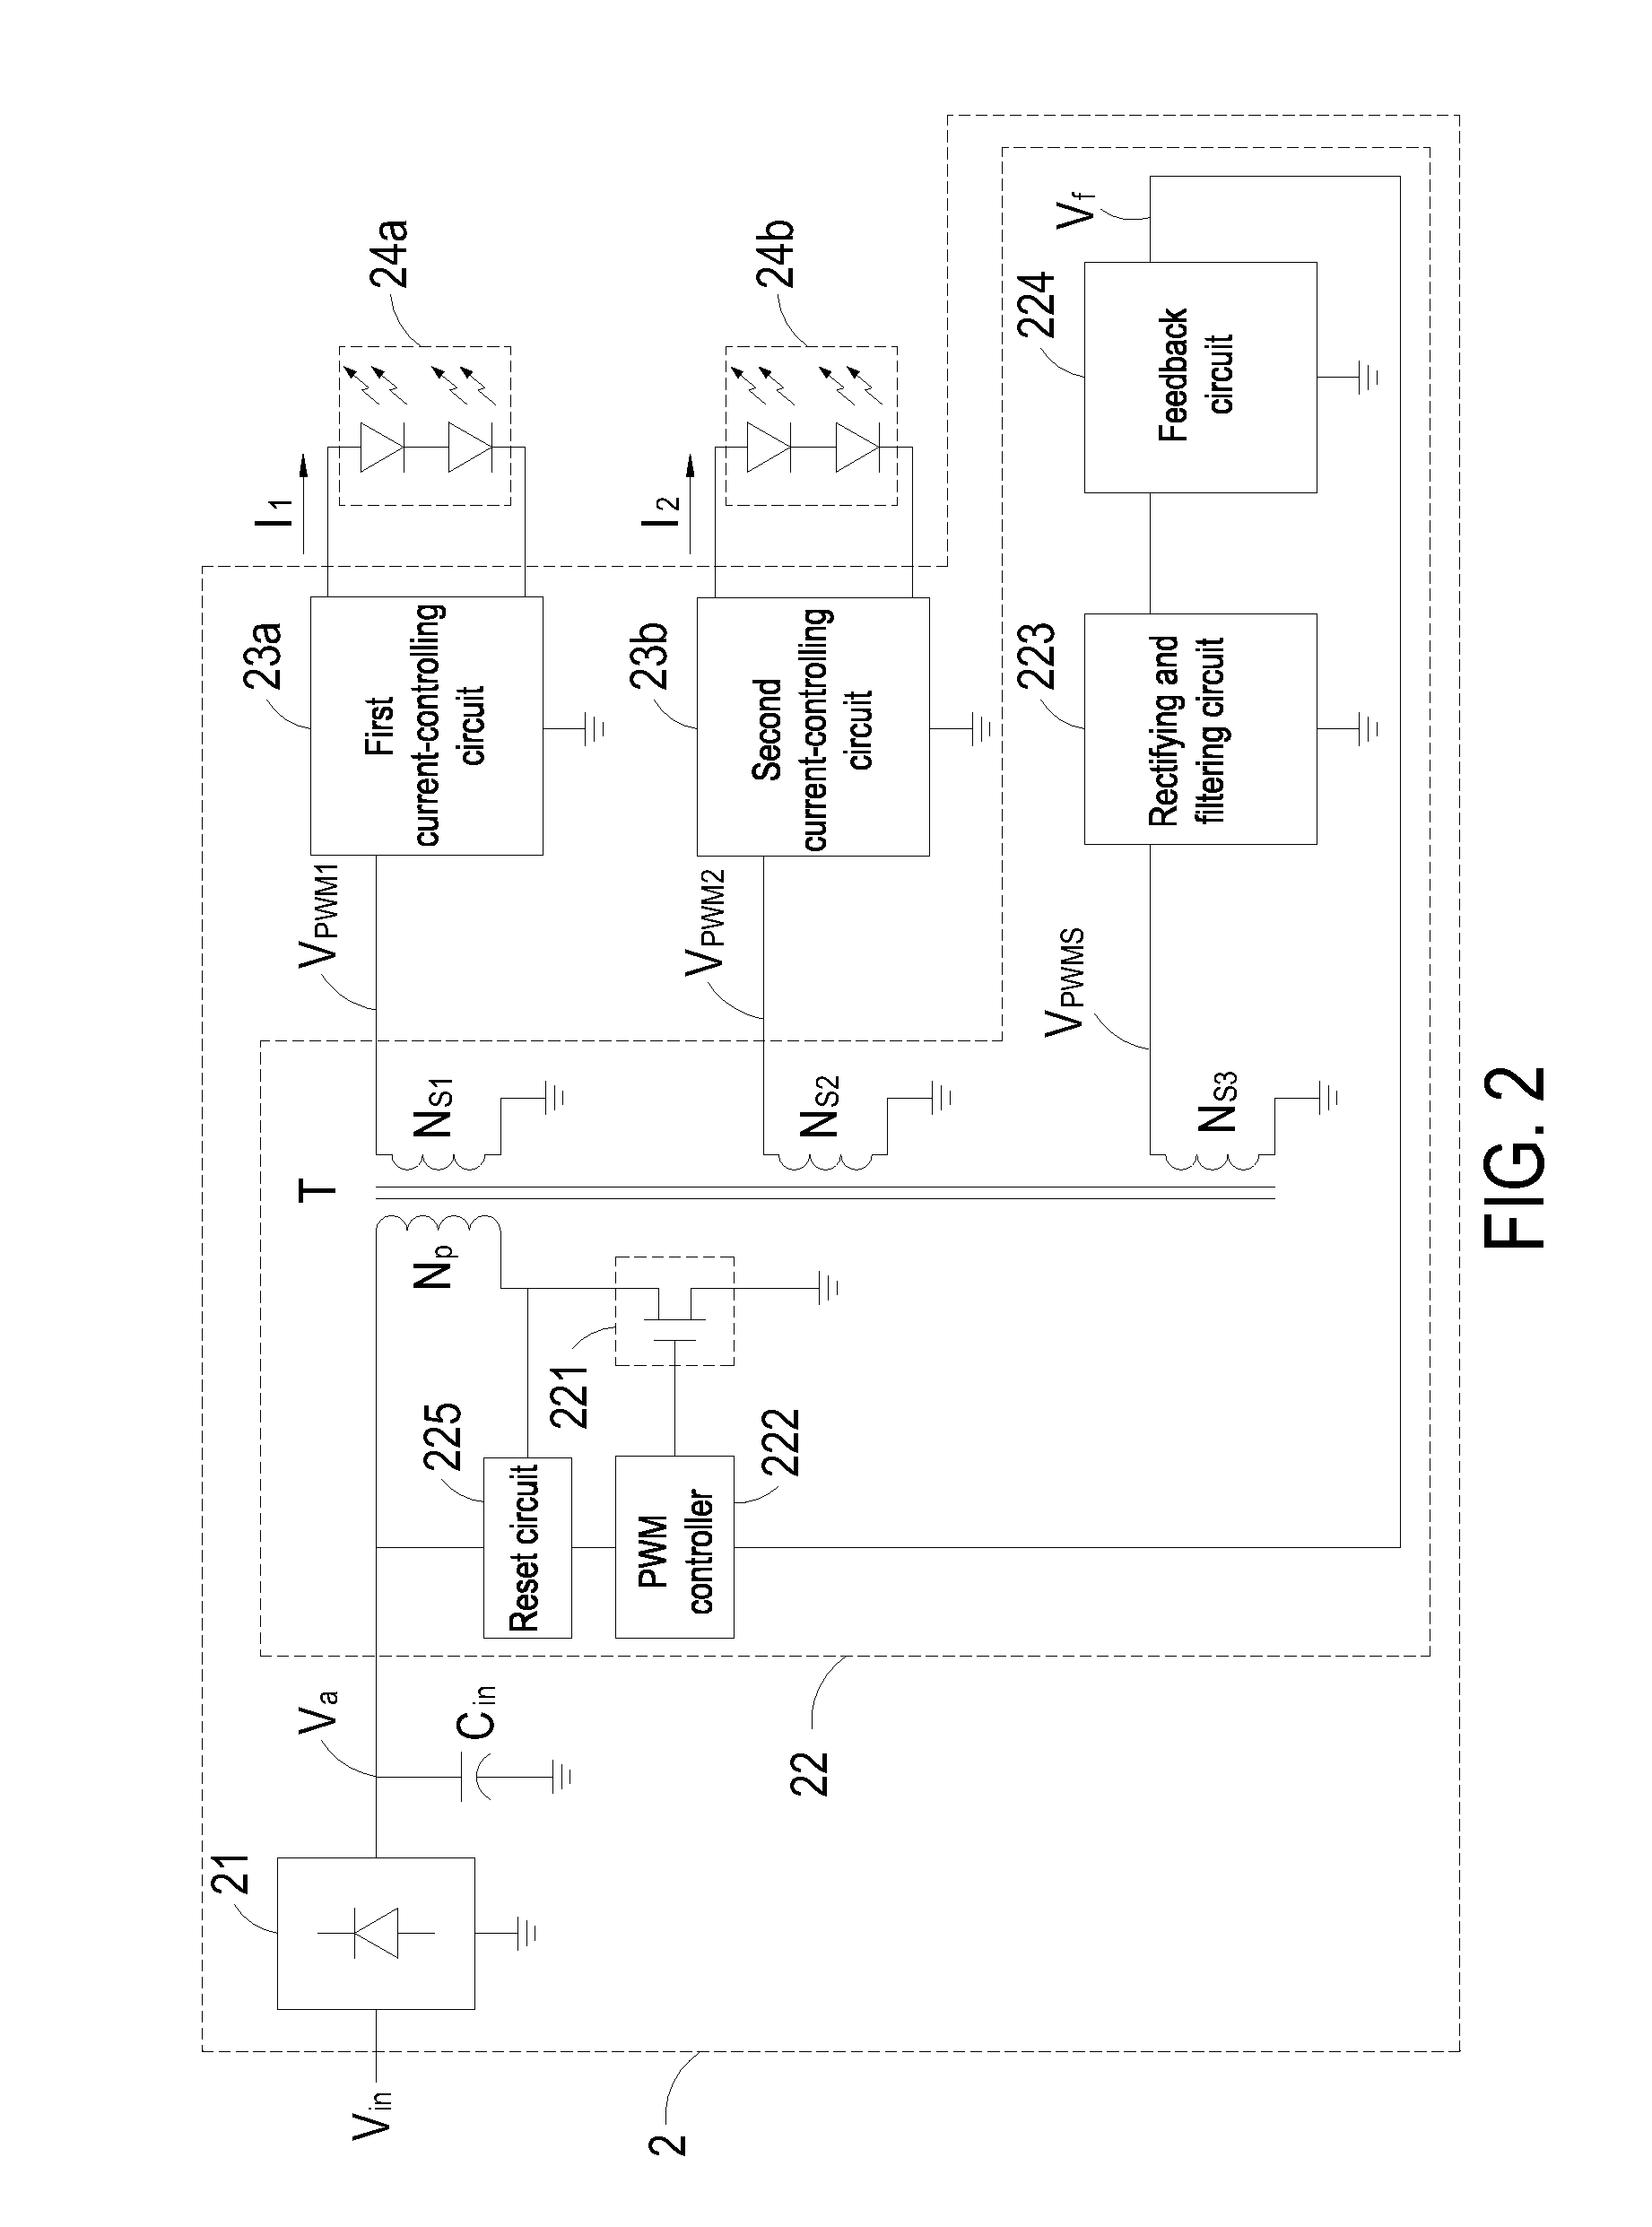 LED current-supplying circuit and LED current-controlling circuit